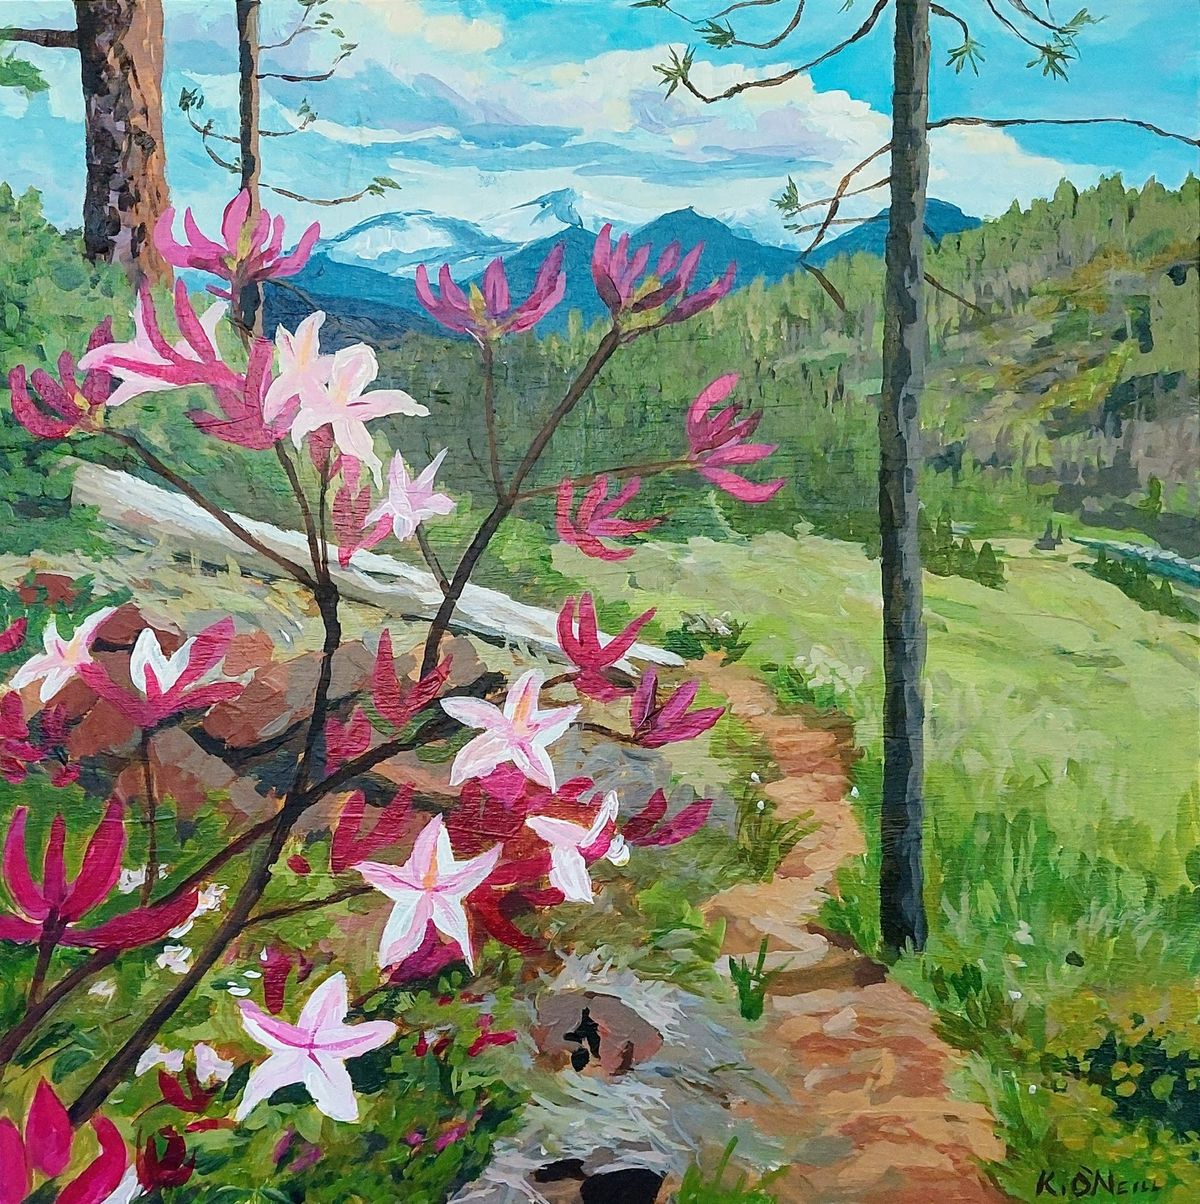 First Friday Art Show in July with artist Kristen O'Neill, Wild and Scenic: Paintings Exploring the 